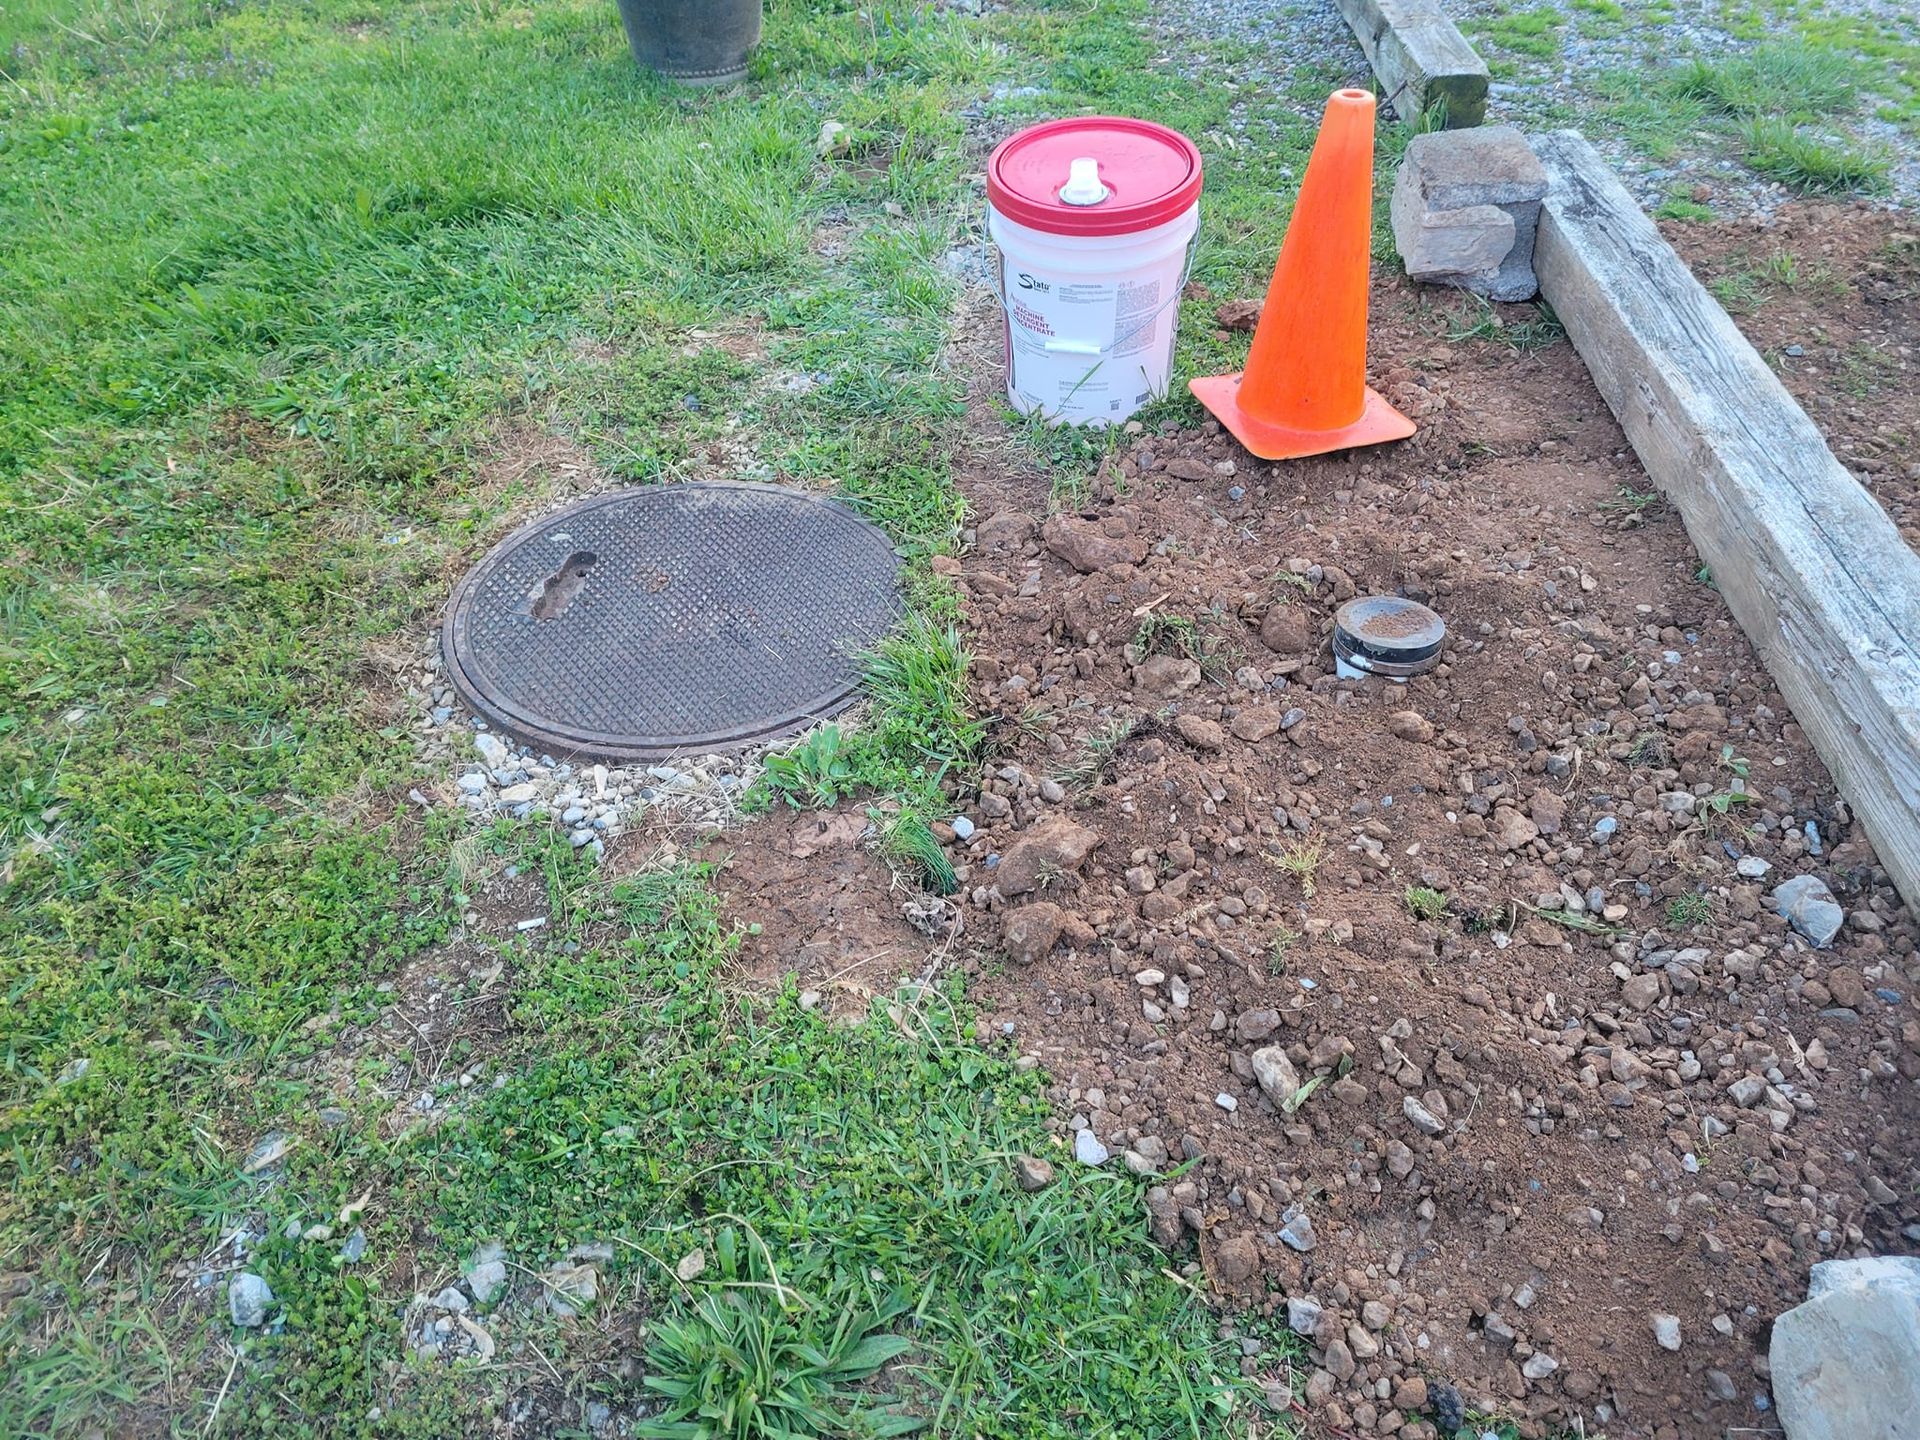 Septic pumping services in Lancaster, PA